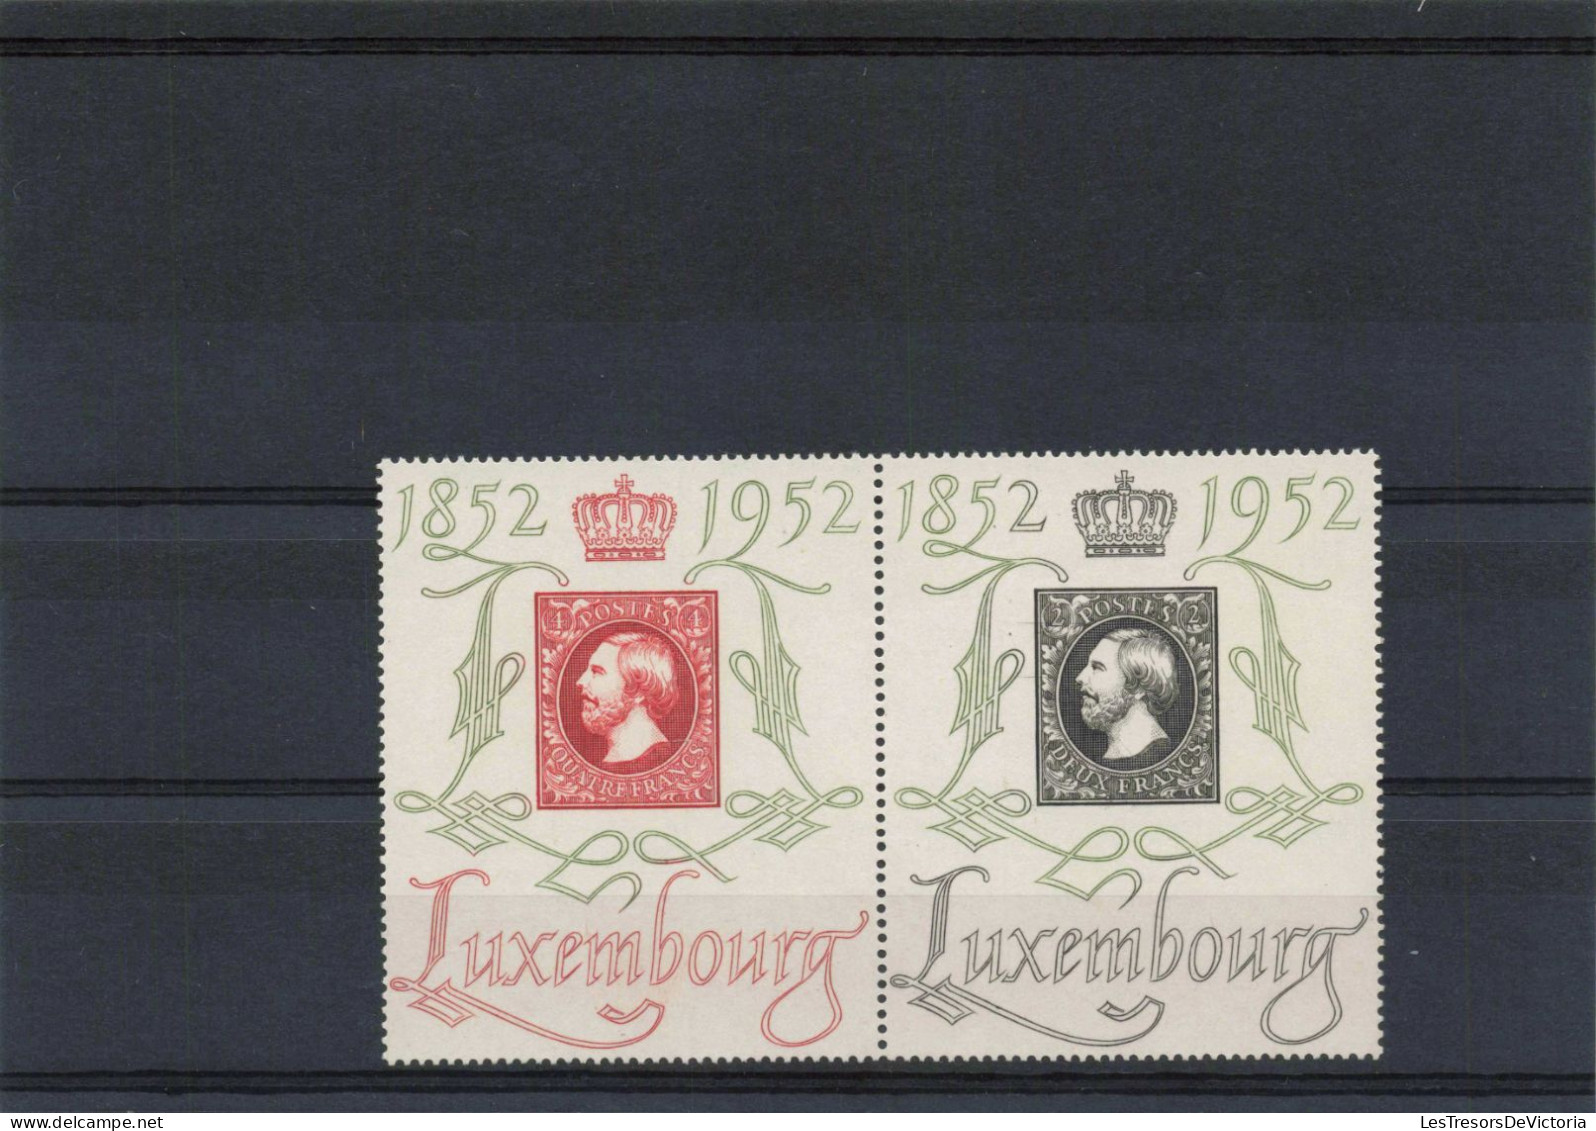 Luxembourg - Bloc MNH** N° 7 - 1952 - Michel 488/9 - Timbres Sur Timbres - Blocs & Feuillets